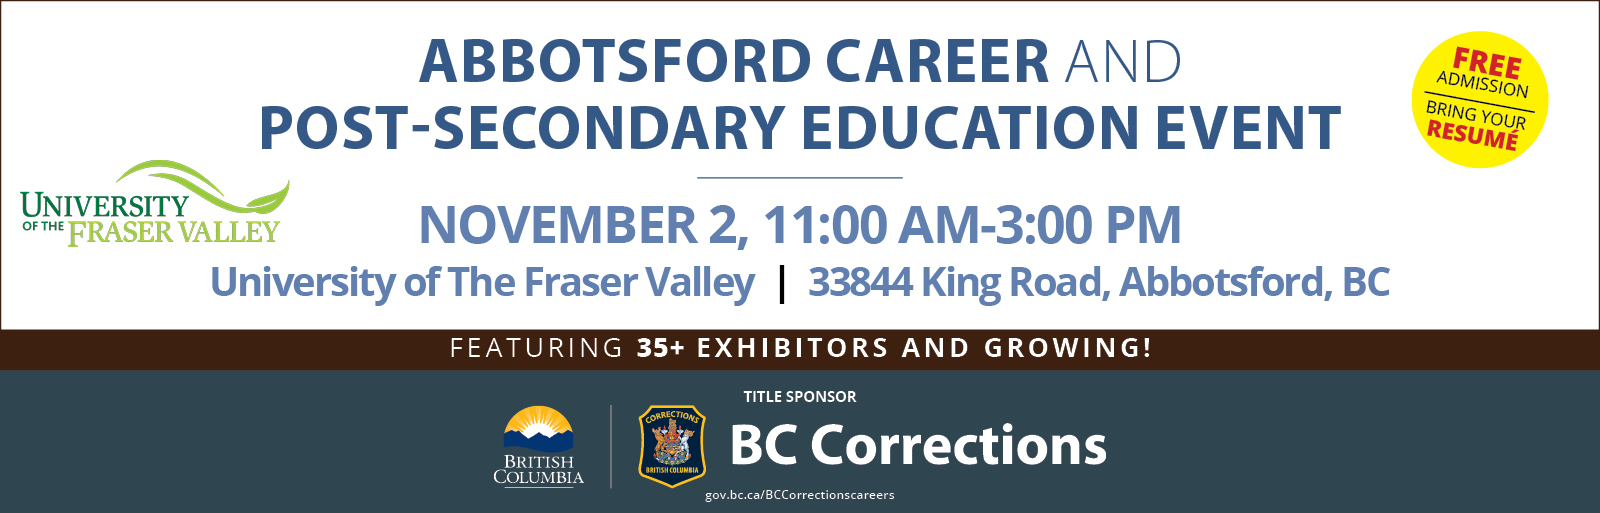 Abbotsford Career & Post-Secondary Education Event: November 2nd, 2022